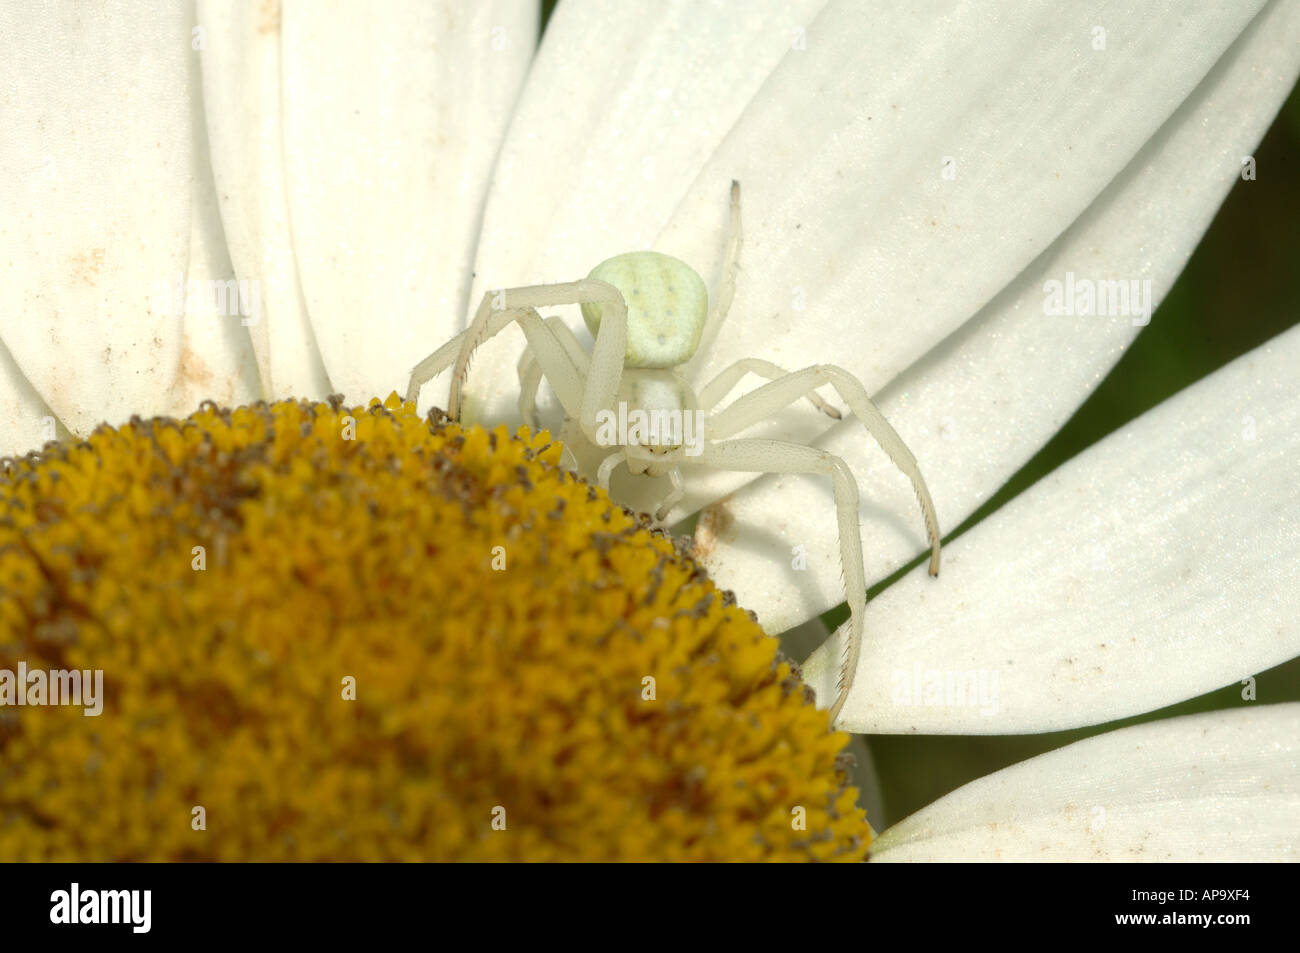 Goldenrod Crab Spider Misumena vatia a pale colour a variation of this crab spider on a shasta daisy flower Stock Photo